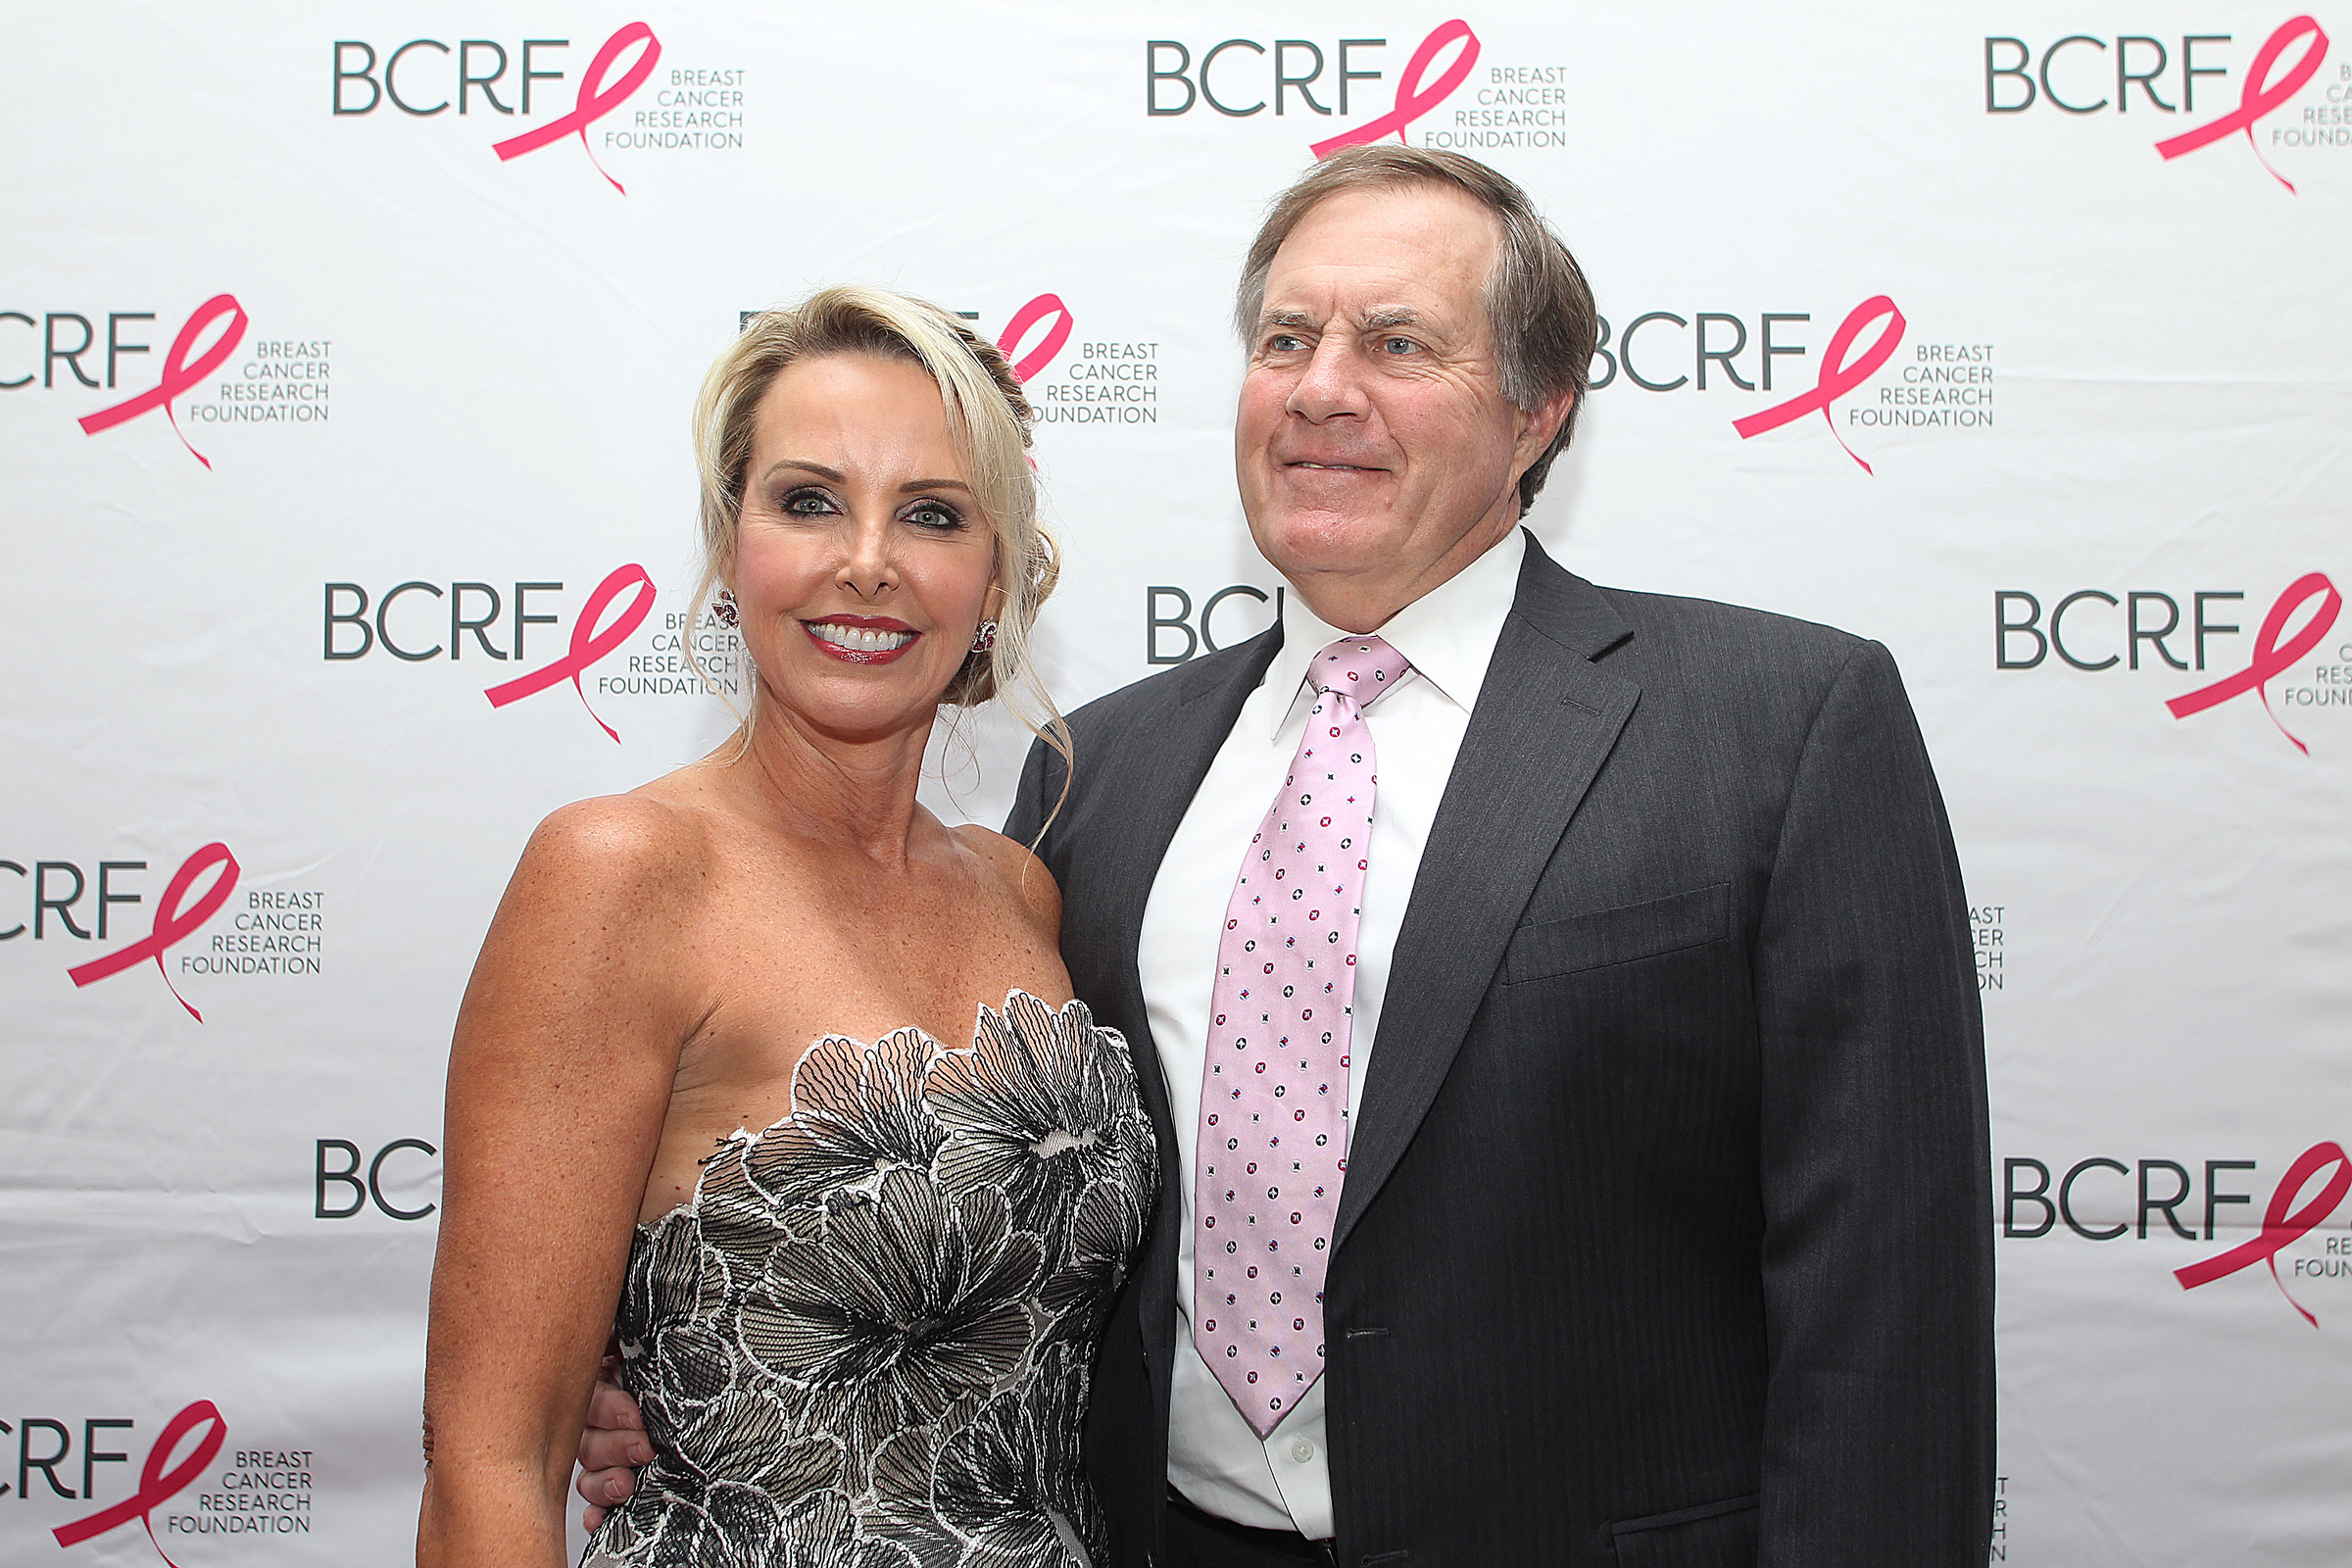 Linda Holliday and Bill Belichick at the Breast Cancer Research Foundation's Boston Hot Pink Party 2015, in Boston, Massachusetts. | Source; Getty Images